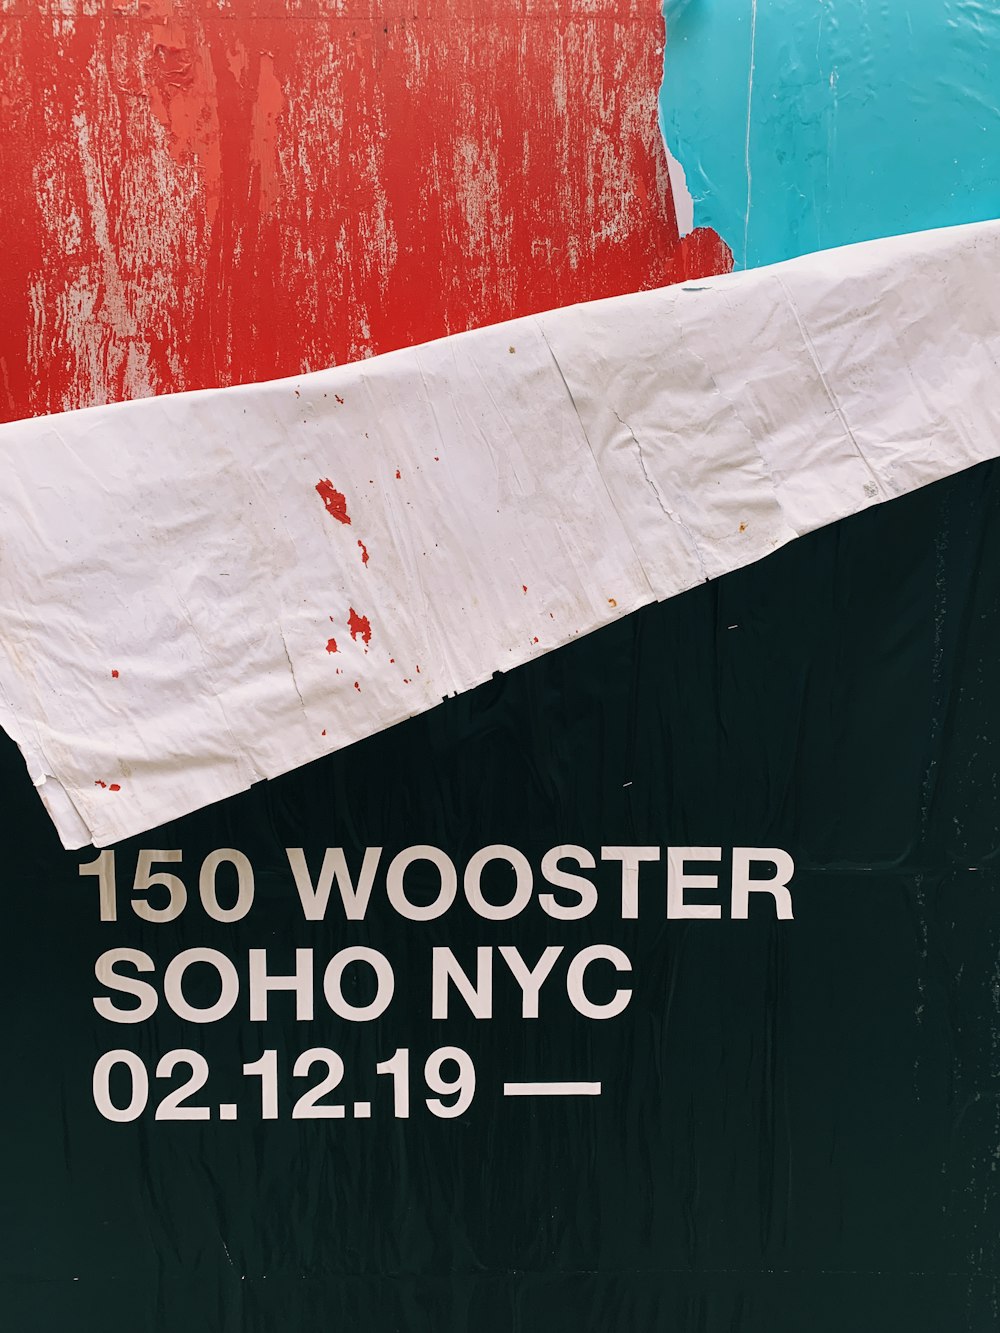 150 Wooster Soho NYC text